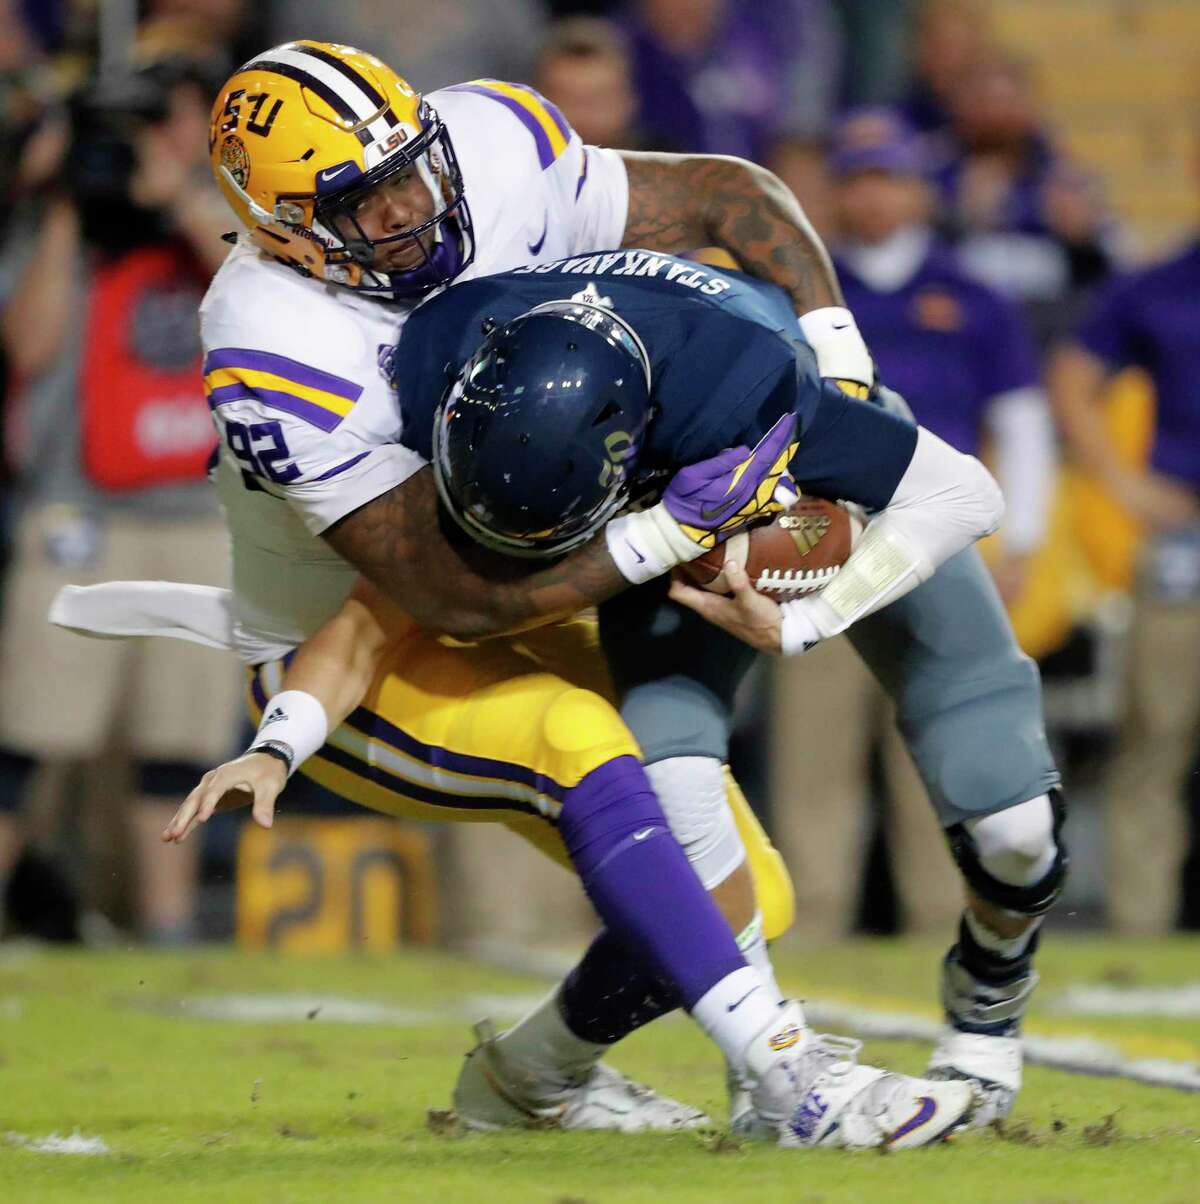 LSU defensive end Neil Farrell Jr. (92) was expected to start for the defending national champions this season but opted out, citing concerns over the COVID-19 pandemic and how it has affected his family.